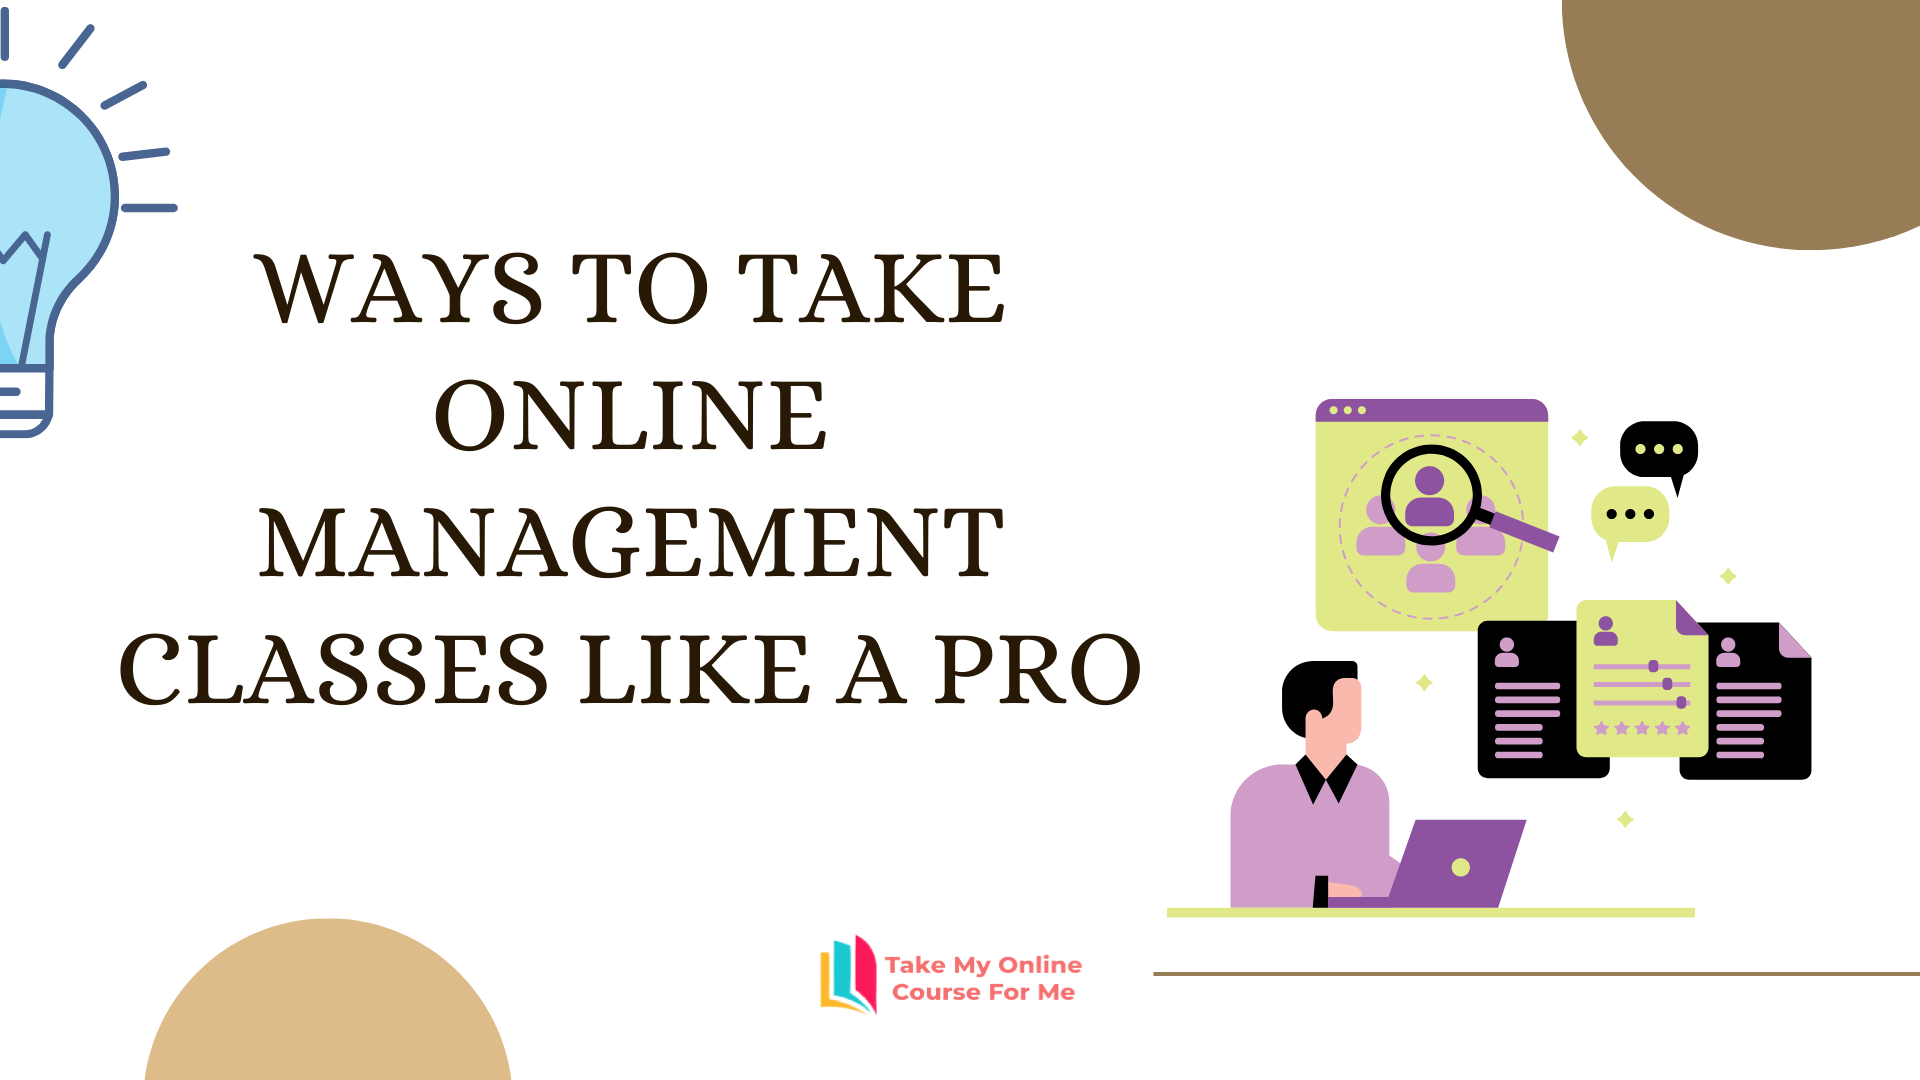 How to Take Online Management Classes Like A Pro